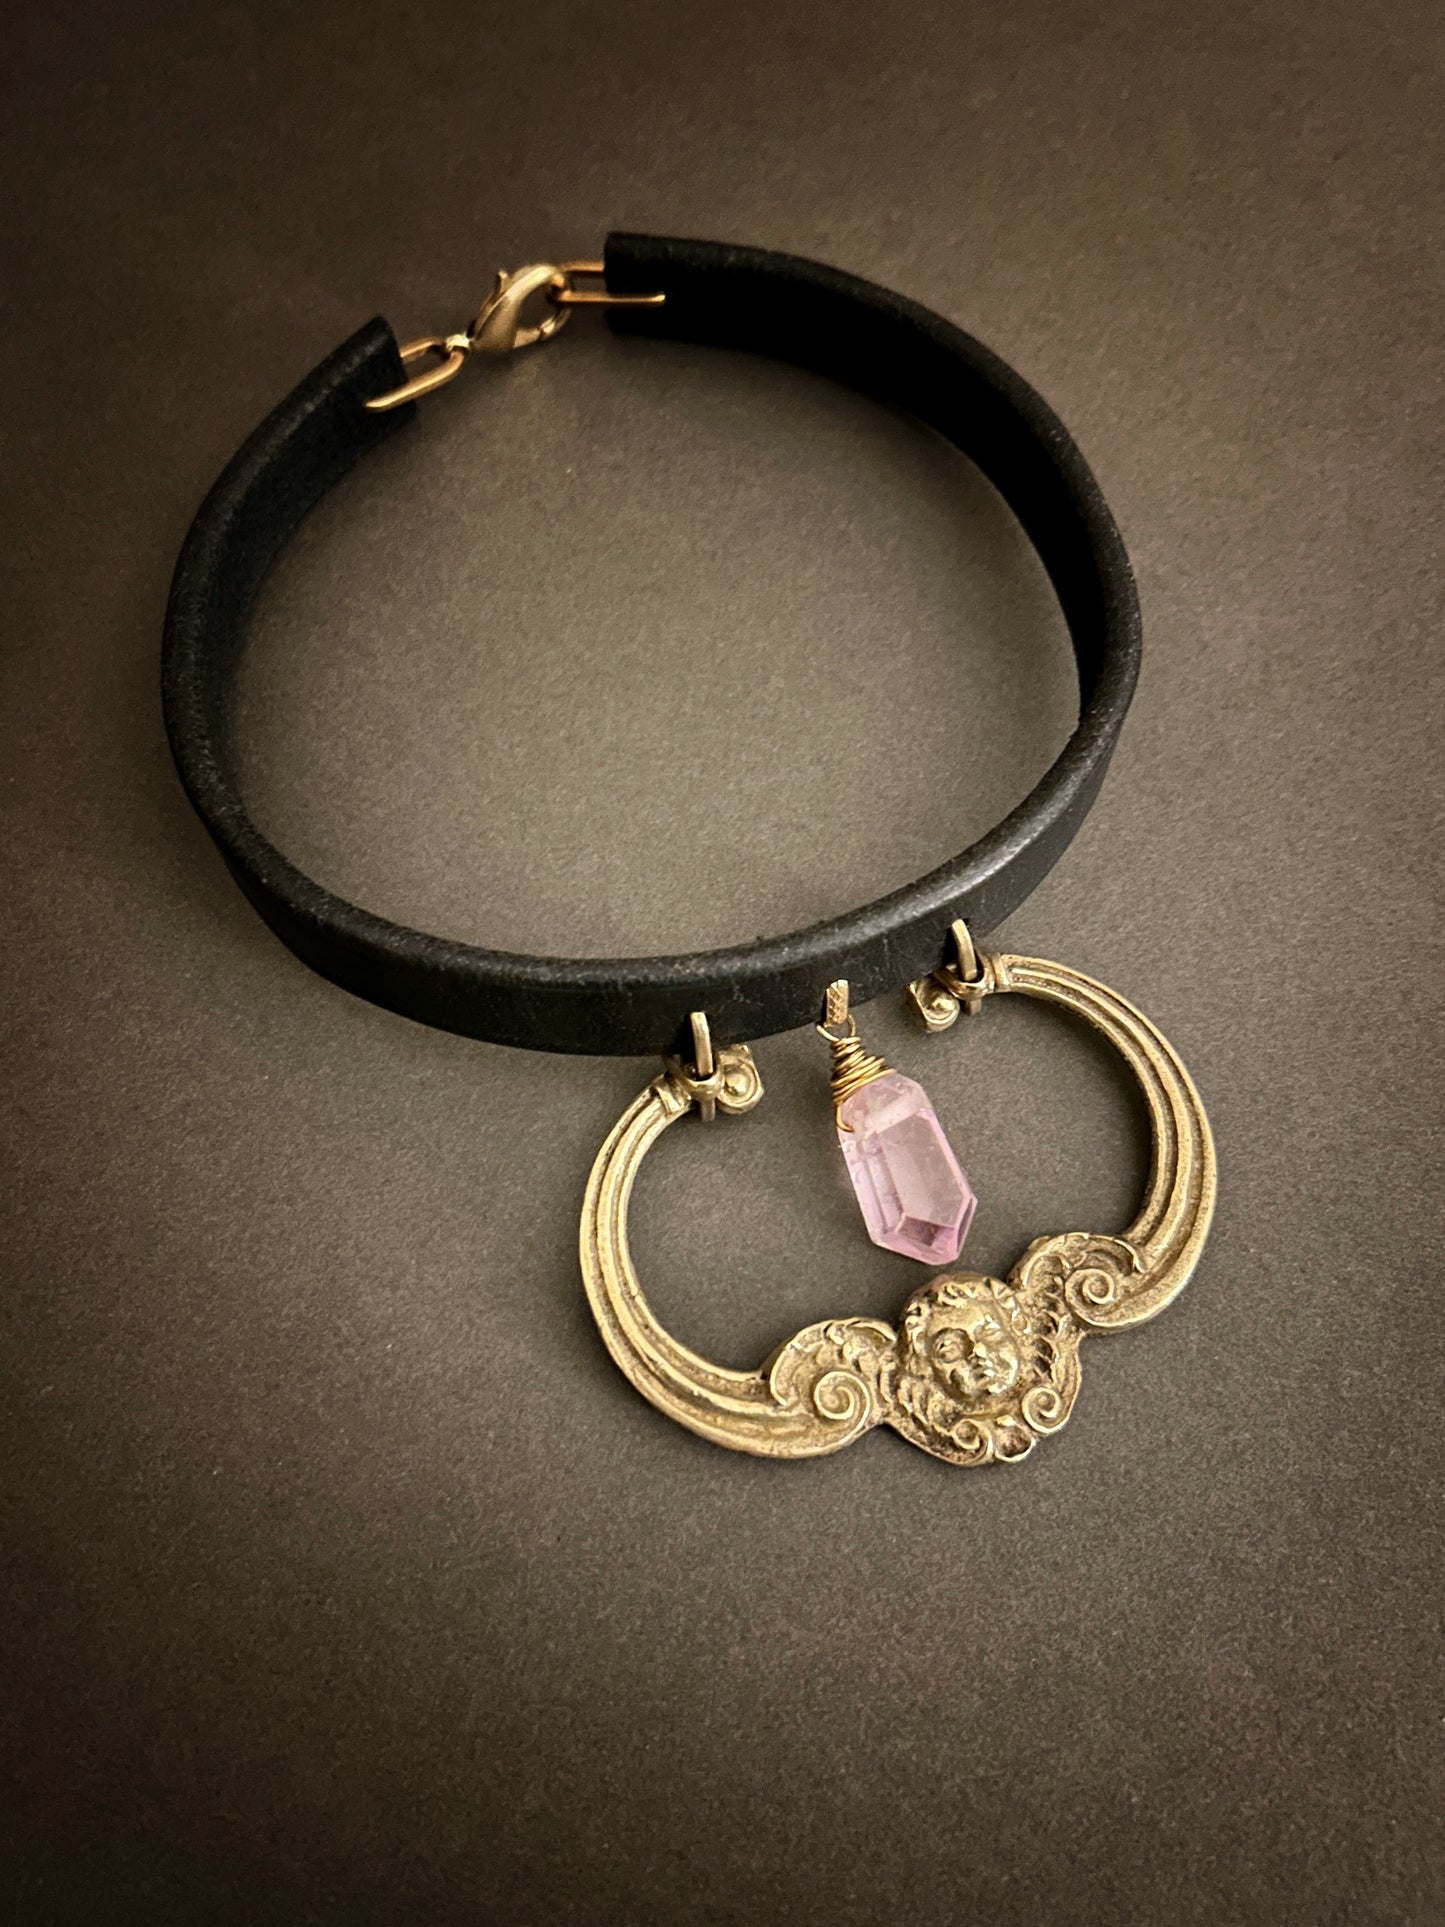 Black tack leather choker with antique cherub hardware and faceted kunzite